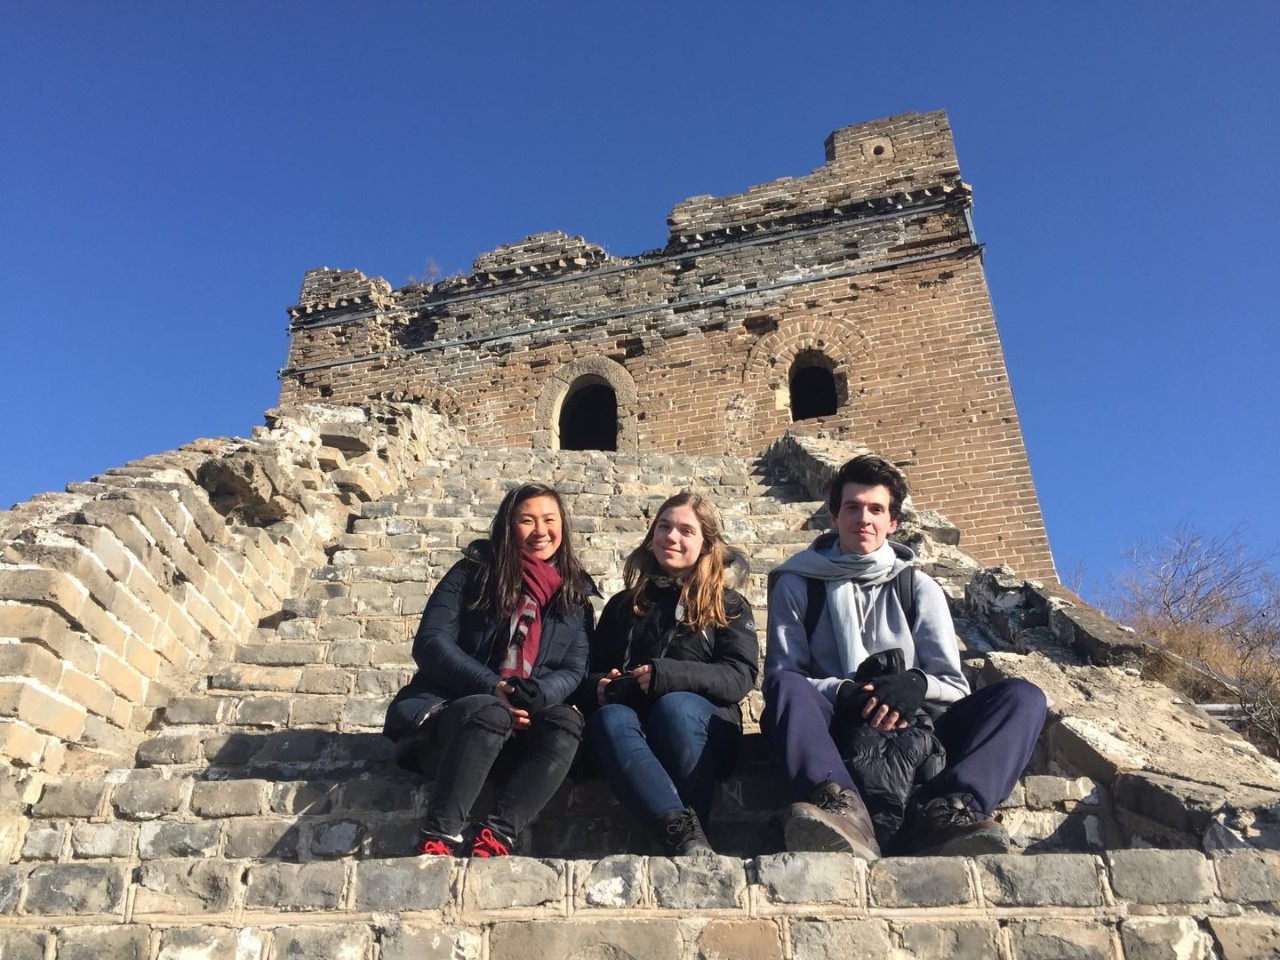 The Great Wall - Beijing students explore and discover